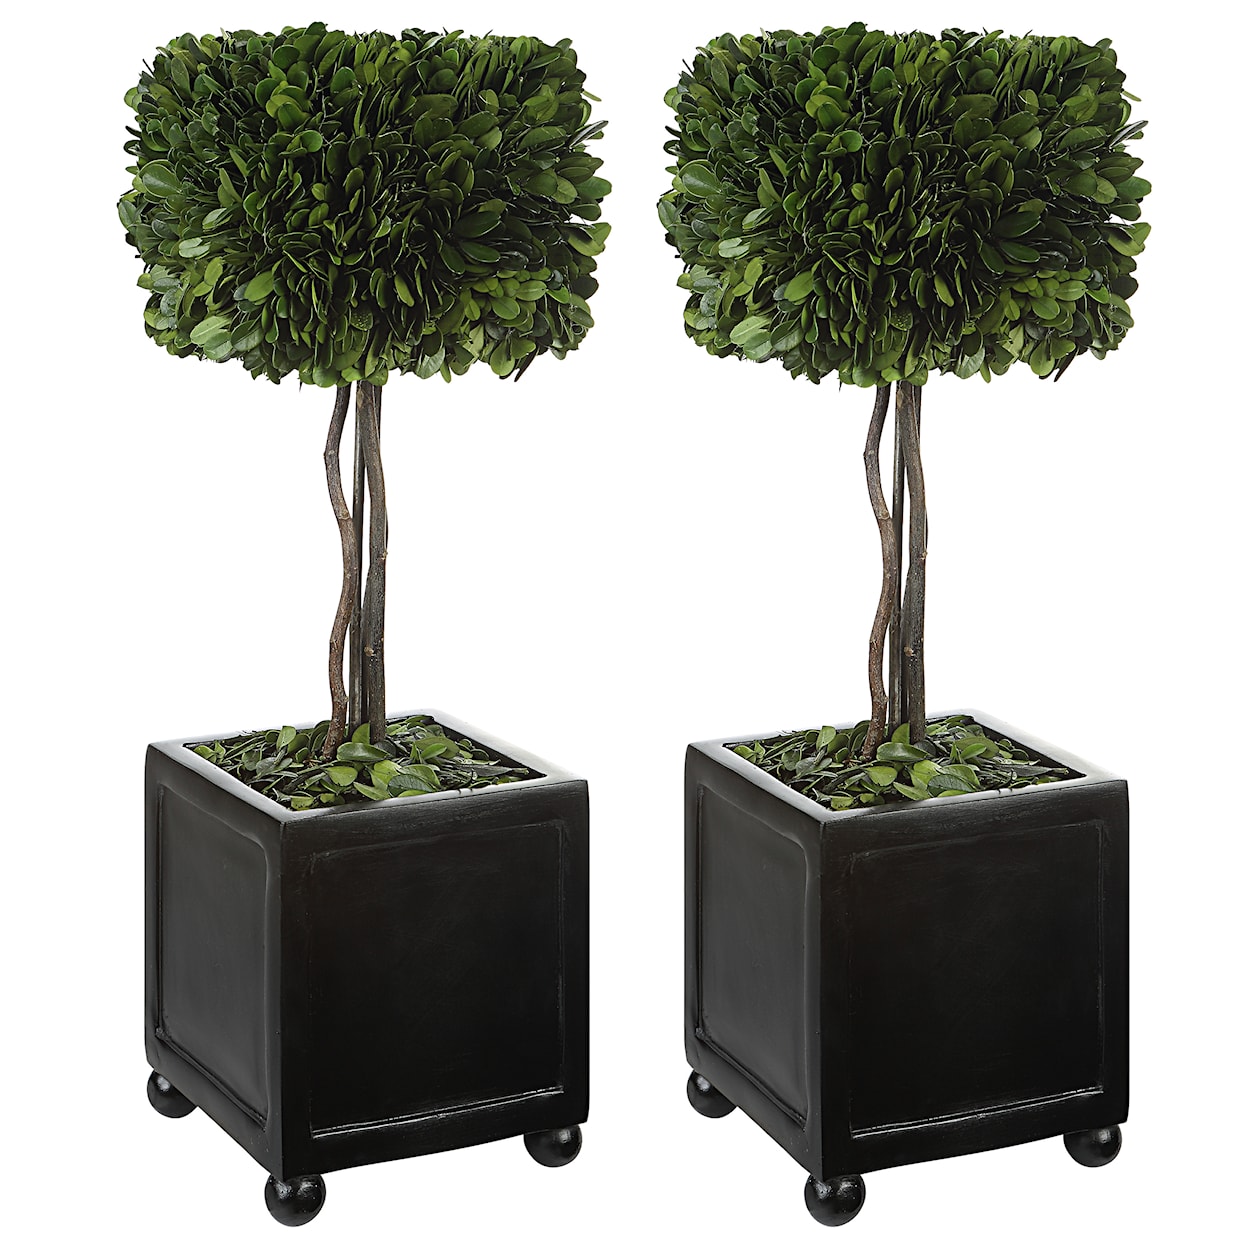 Uttermost Preserved Boxwood Preserved Boxwood Square Topiaries S/2